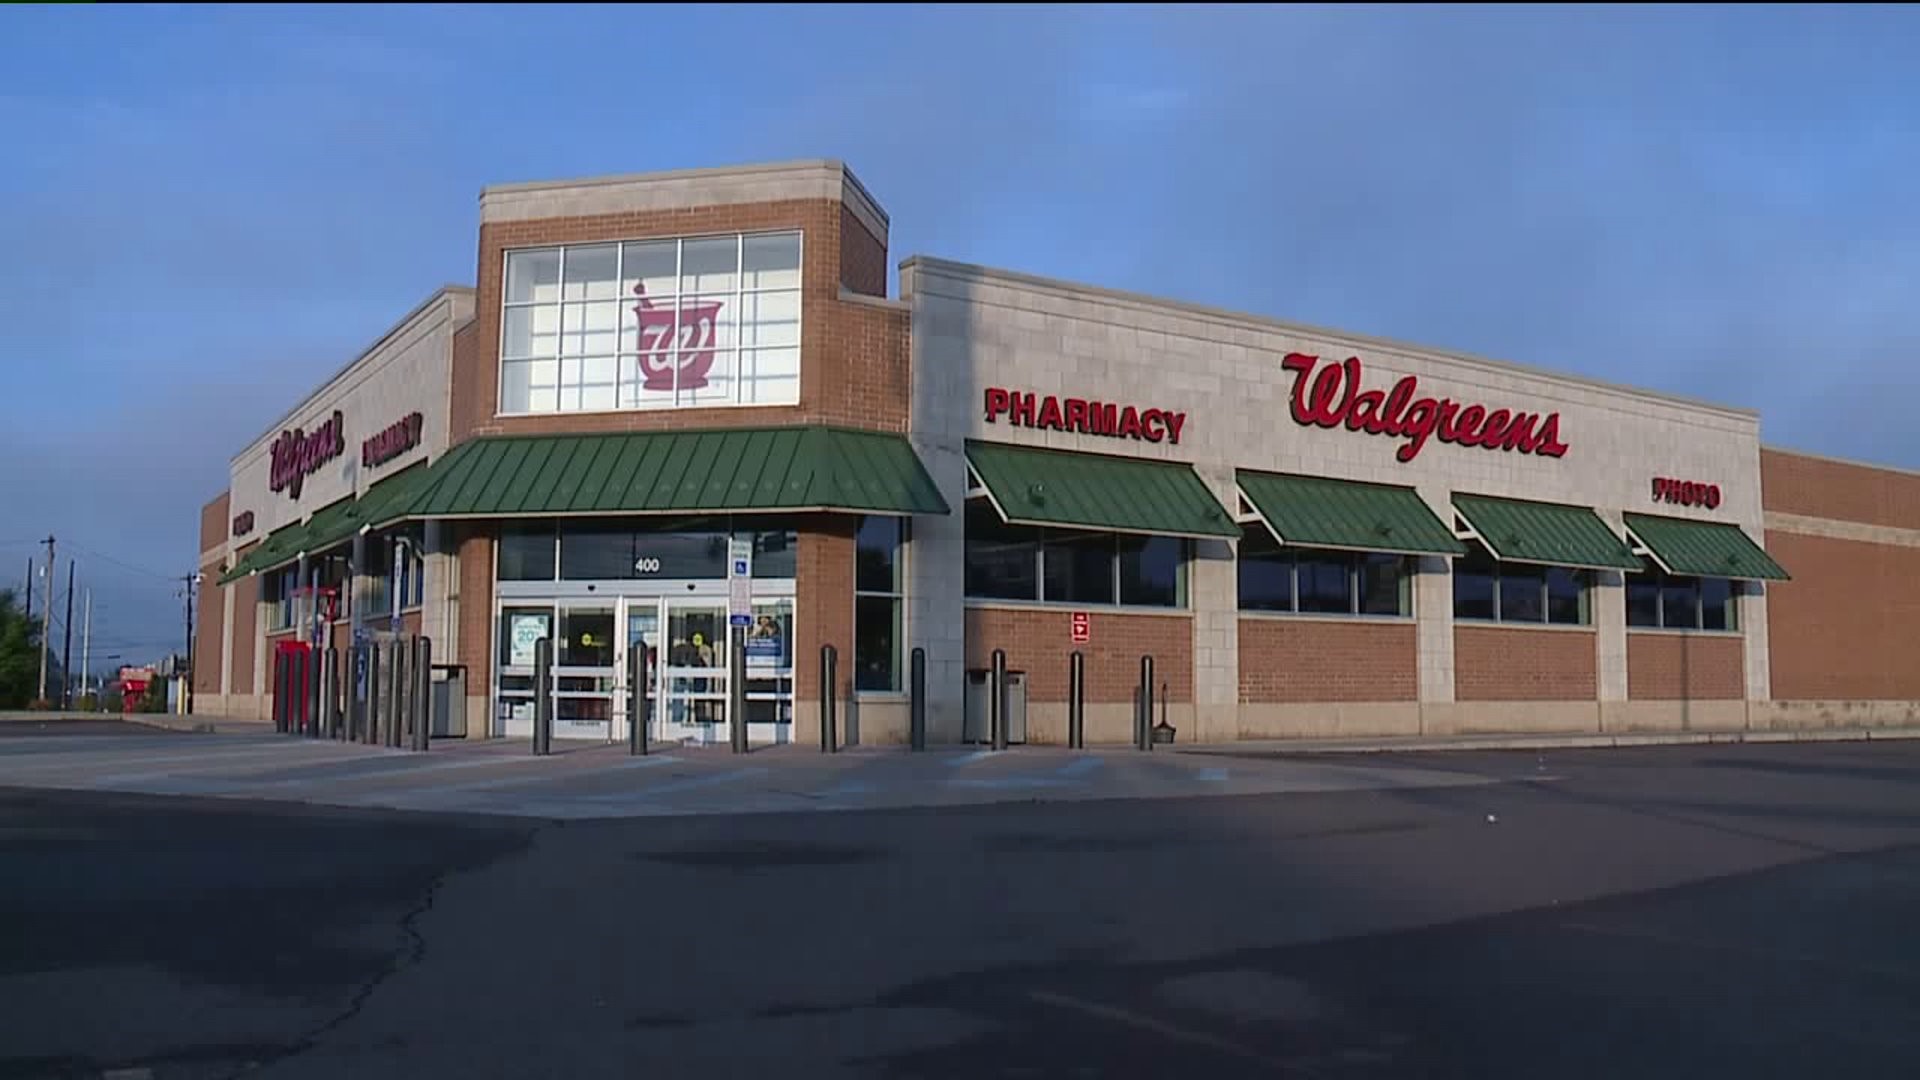 ‘Don’t close this one!’ Local Shoppers Hope Their Walgreens Store